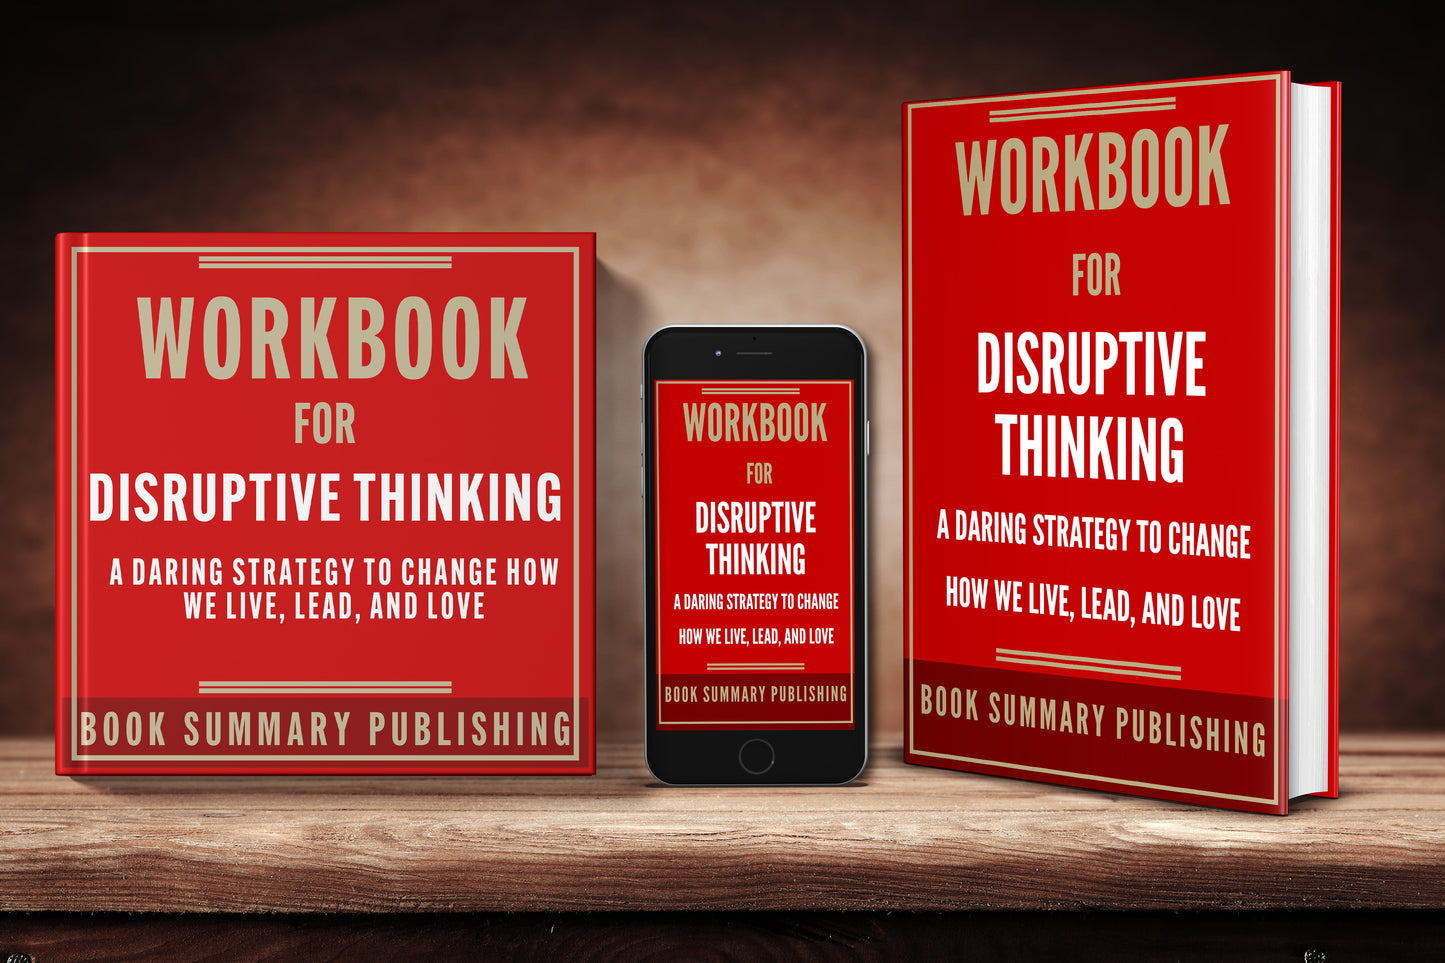 Workbook for "Disruptive Thinking: A Daring Strategy to Change How We Live, Lead and Love" (including Audiobook FOR FREE)